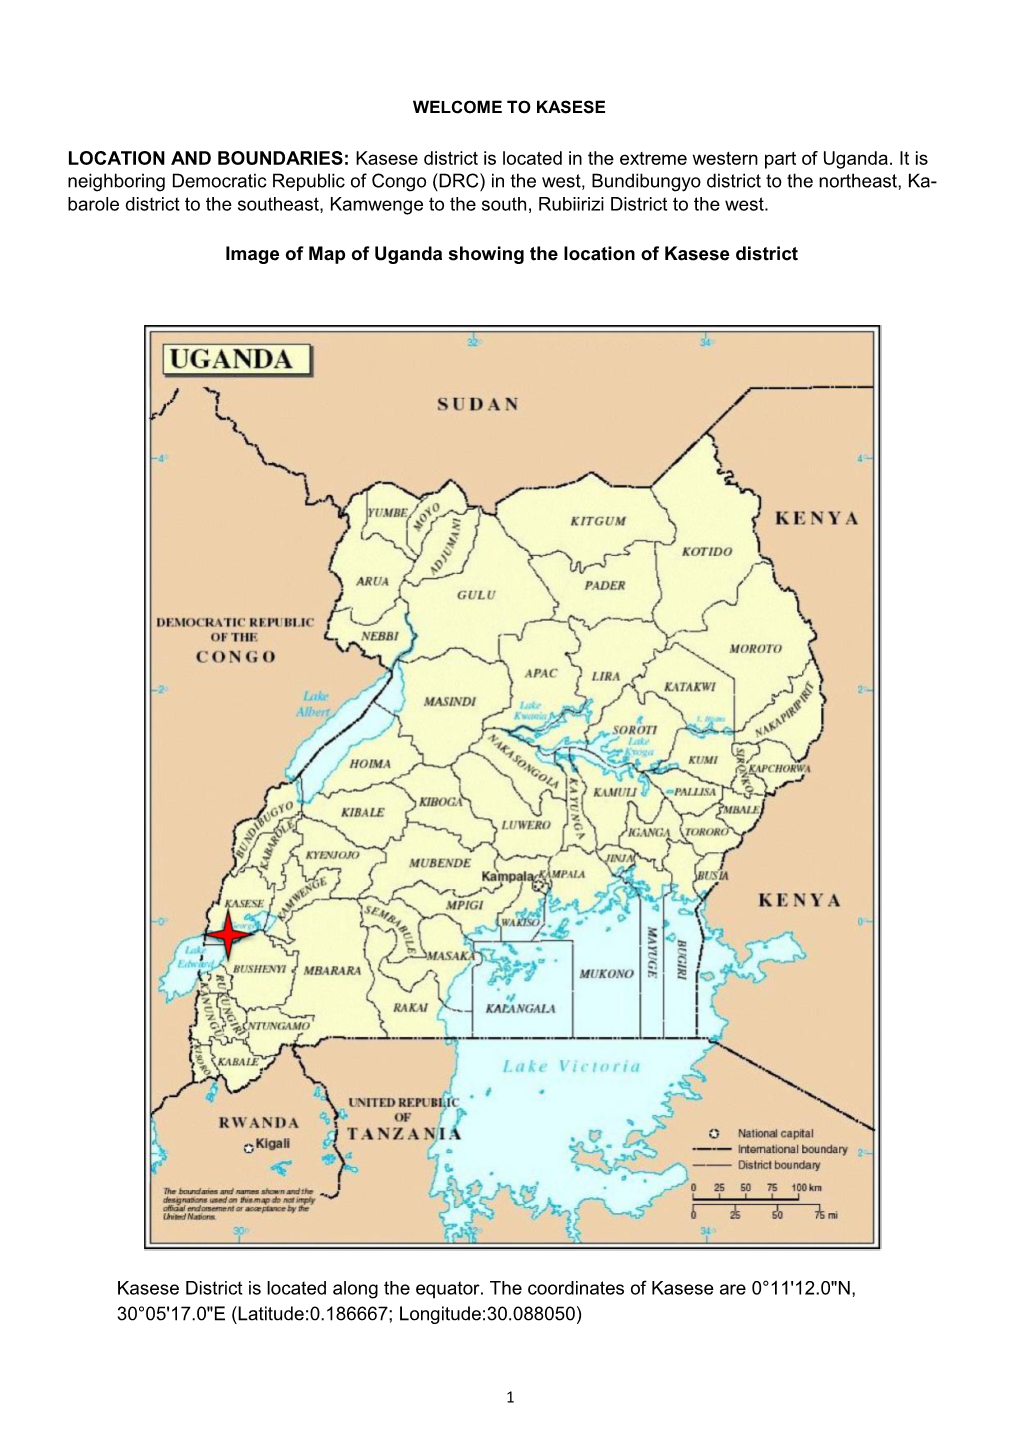 Kasese District Is Located in the Extreme Western Part of Uganda